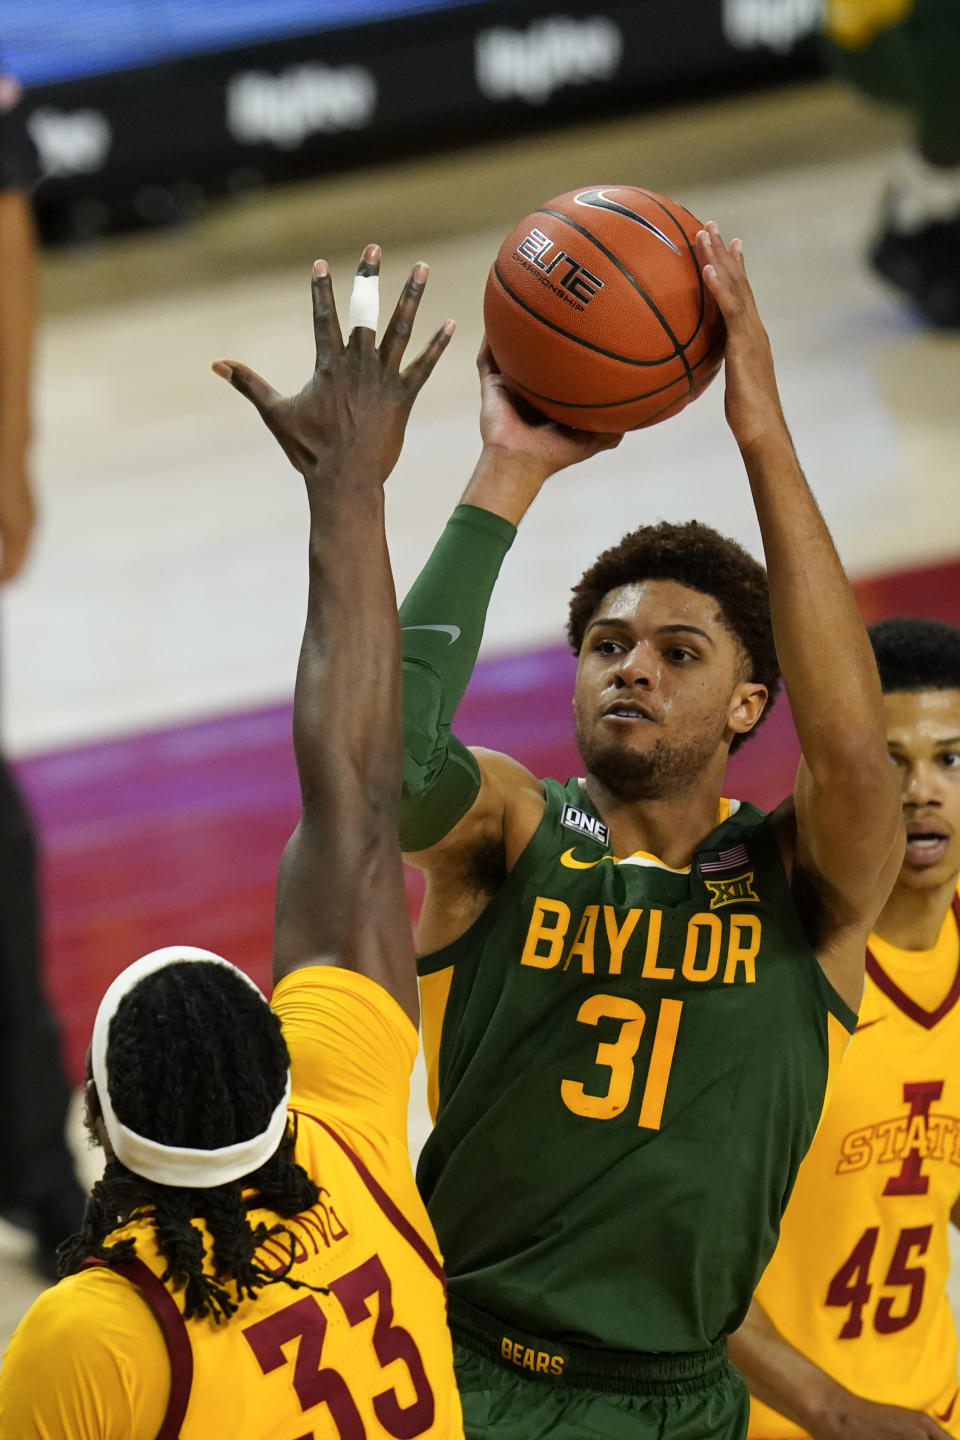 Baylor guard MaCio Teague (31) shoots over Iowa State forward Solomon Young (33) during the second half of an NCAA college basketball game, Saturday, Jan. 2, 2021, in Ames, Iowa. Baylor won 76-65. (AP Photo/Charlie Neibergall)